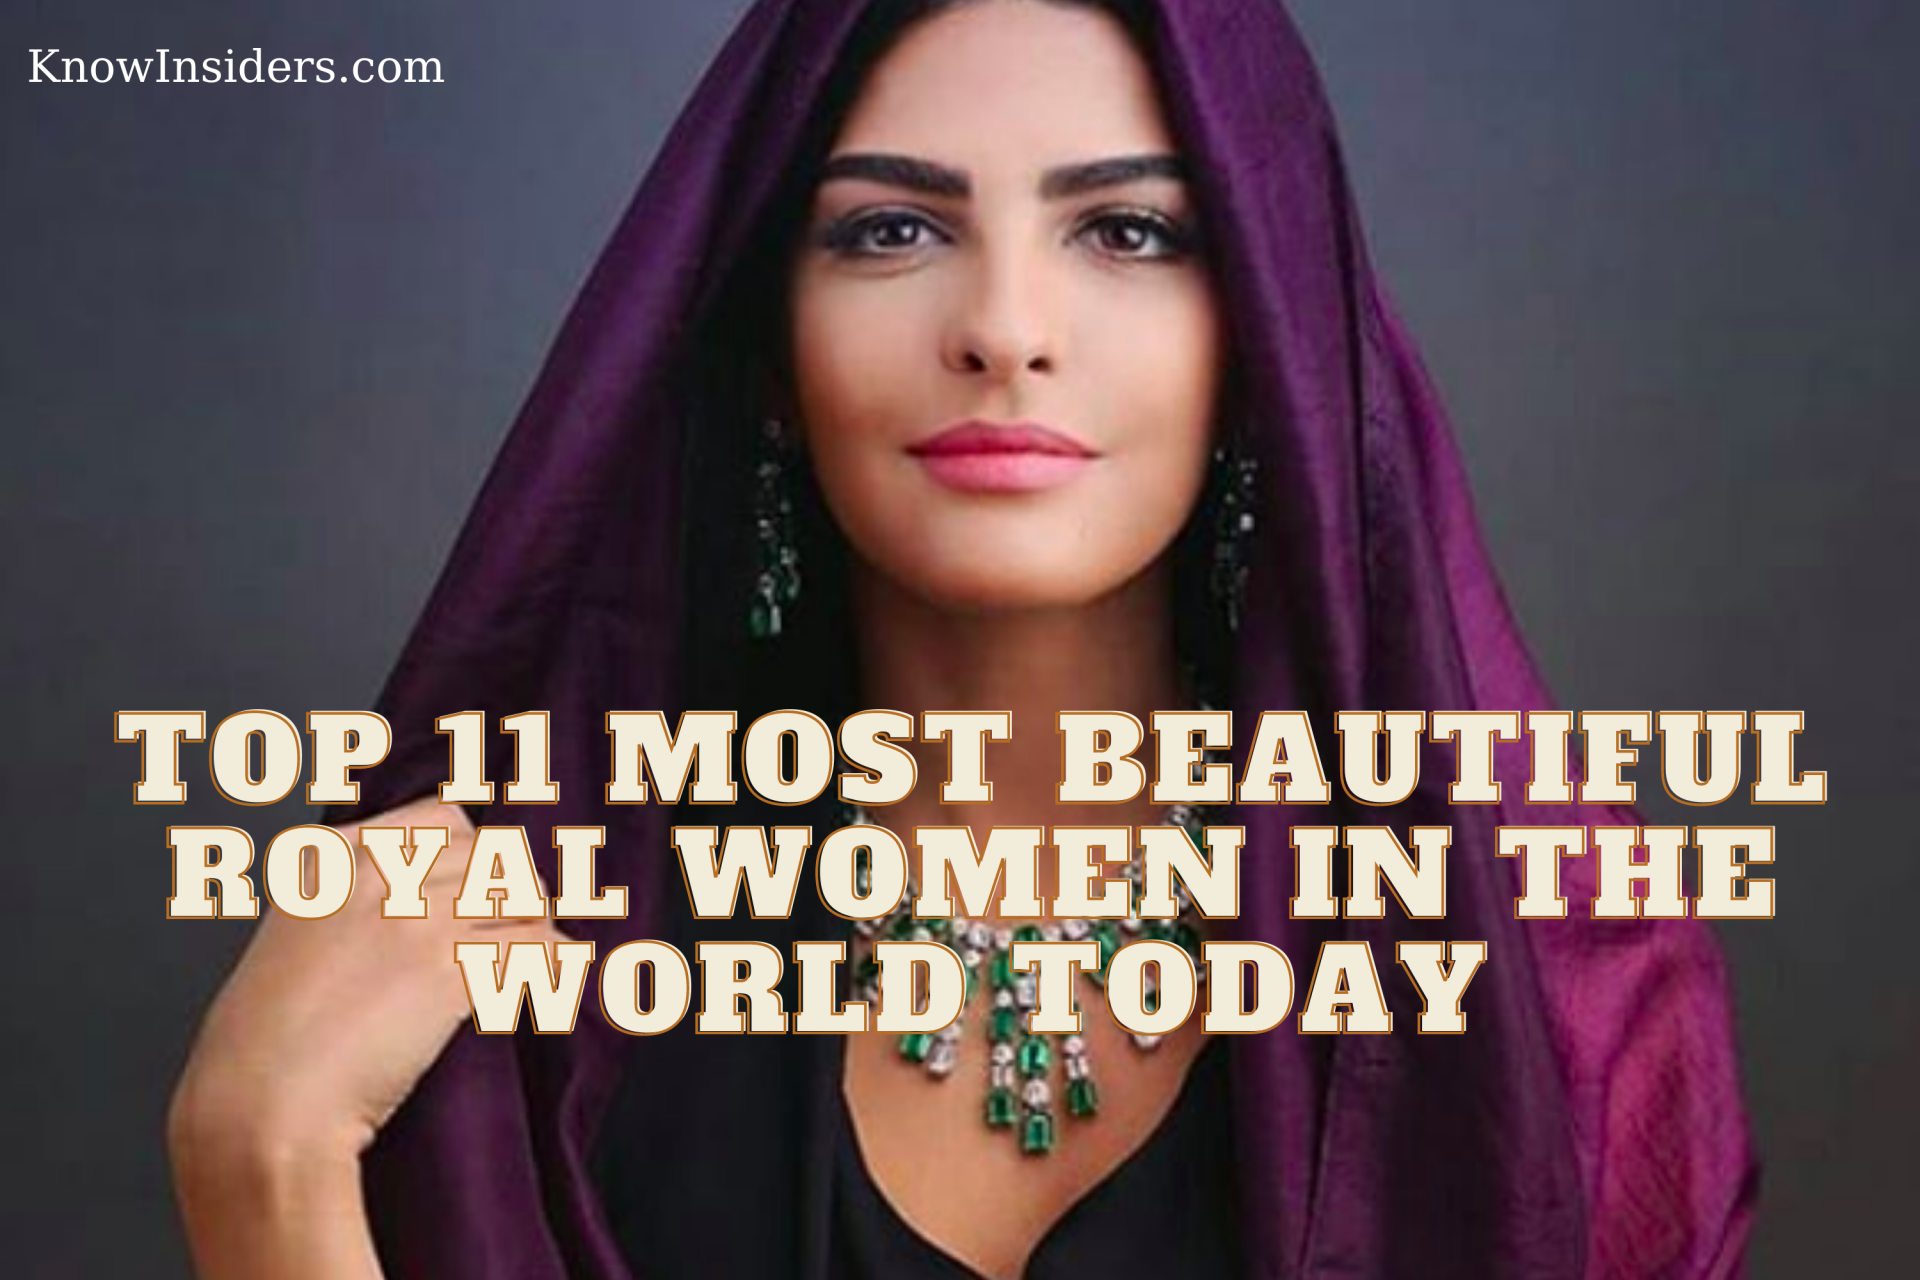 Top 11 Most Beautiful Royal Women In The World Today